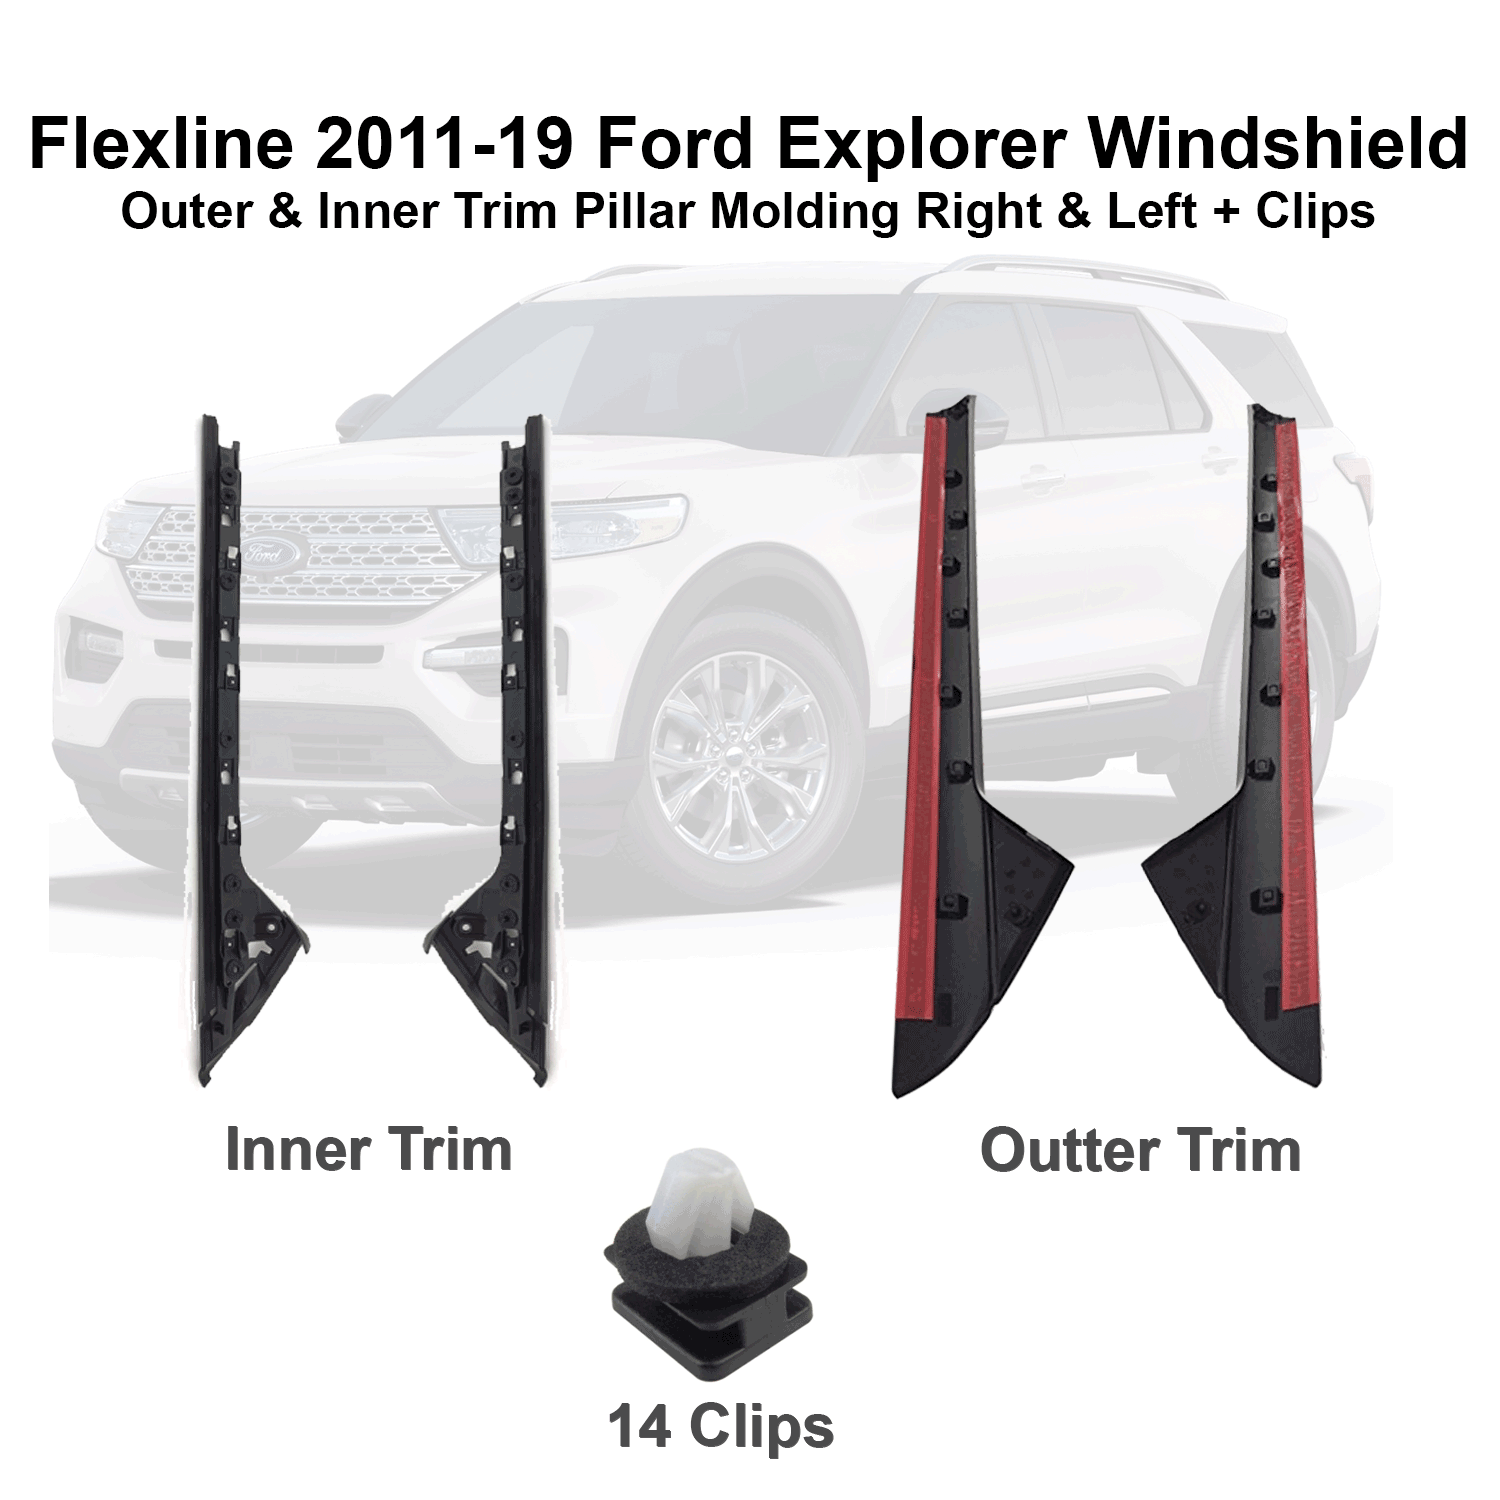 Flexline 2011-19 Compatible with Ford Explorer Windshield Outer (Glossy) & Inner Trim Pillar Molding Right & Left + Clips Ford Explorer Driver and Passenger Side Trim molding DW1843